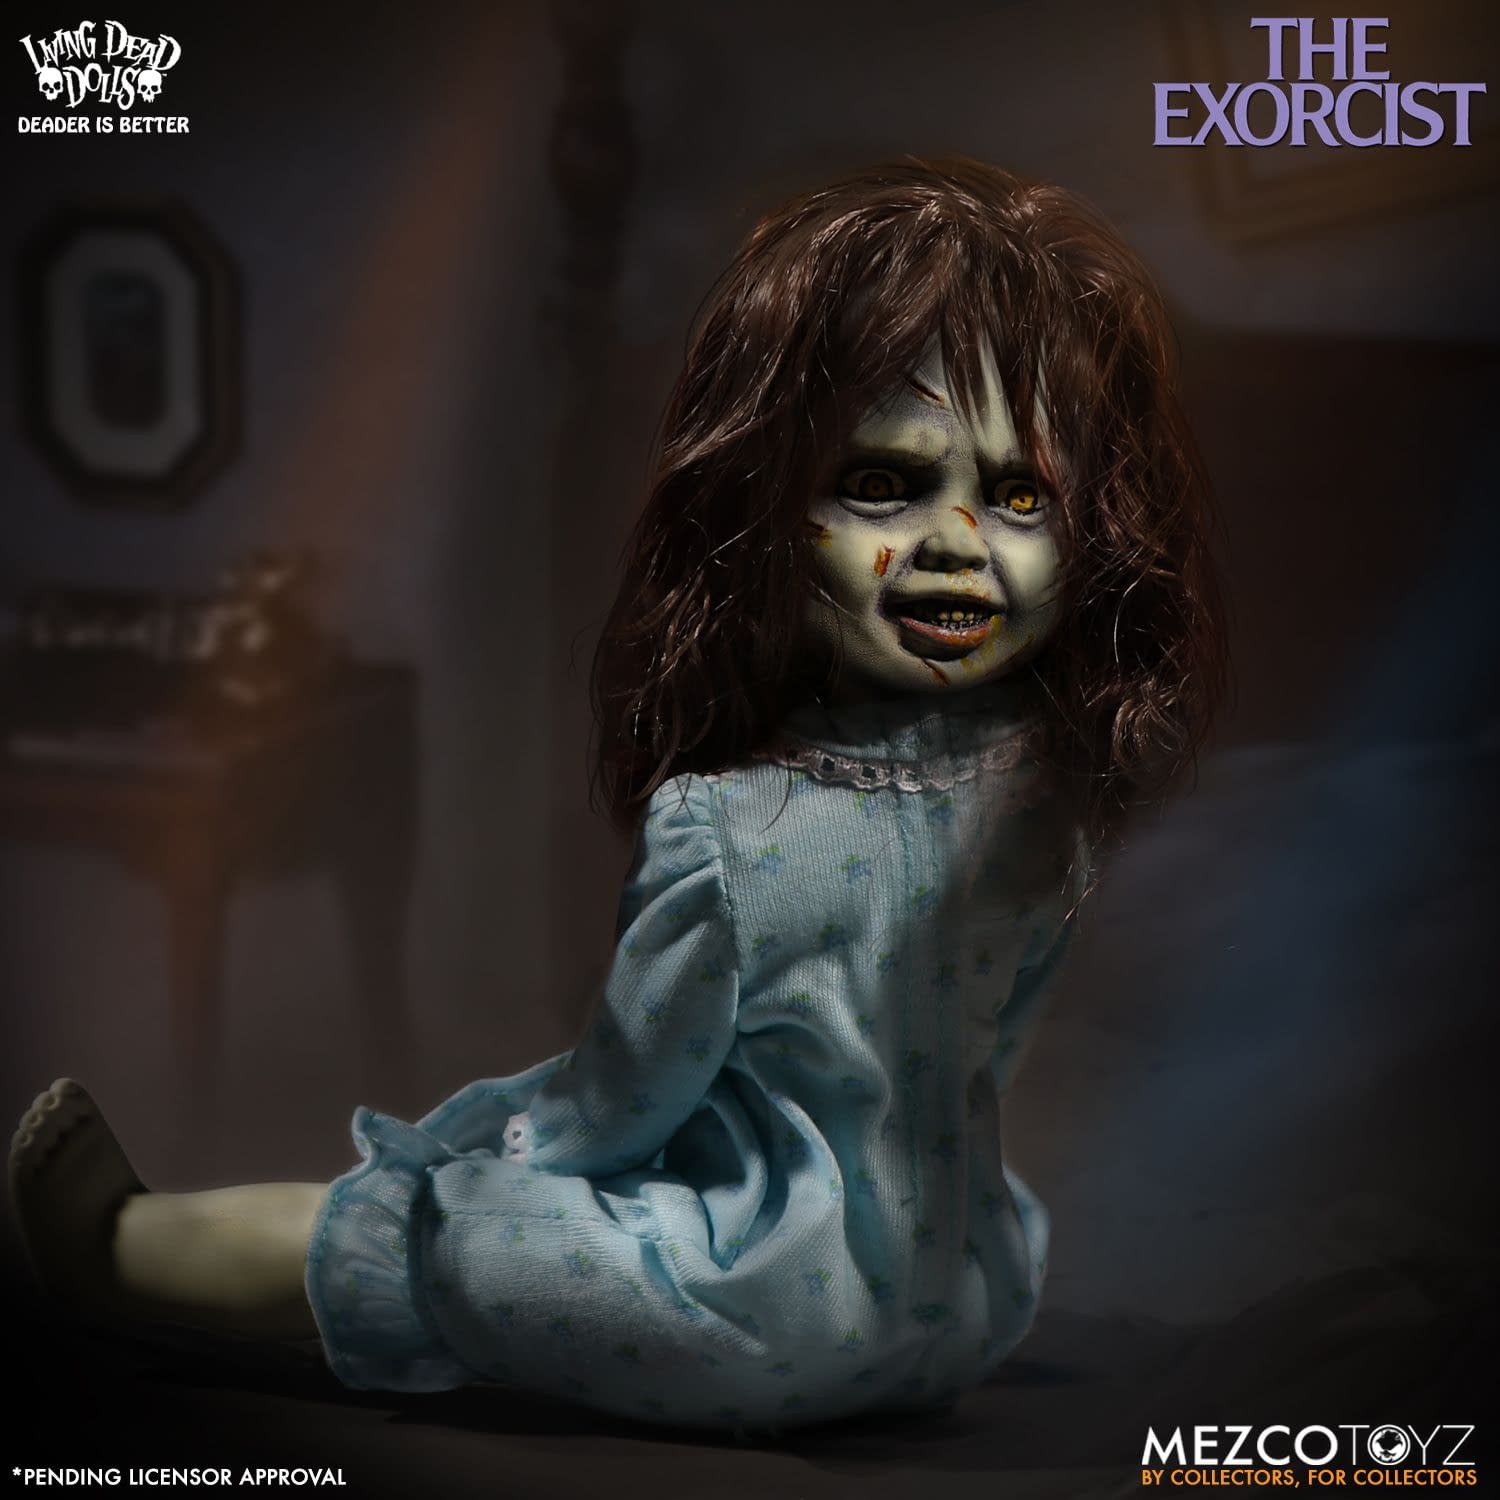 The Exorcist Lives with the New Living Dead Doll from Mezco